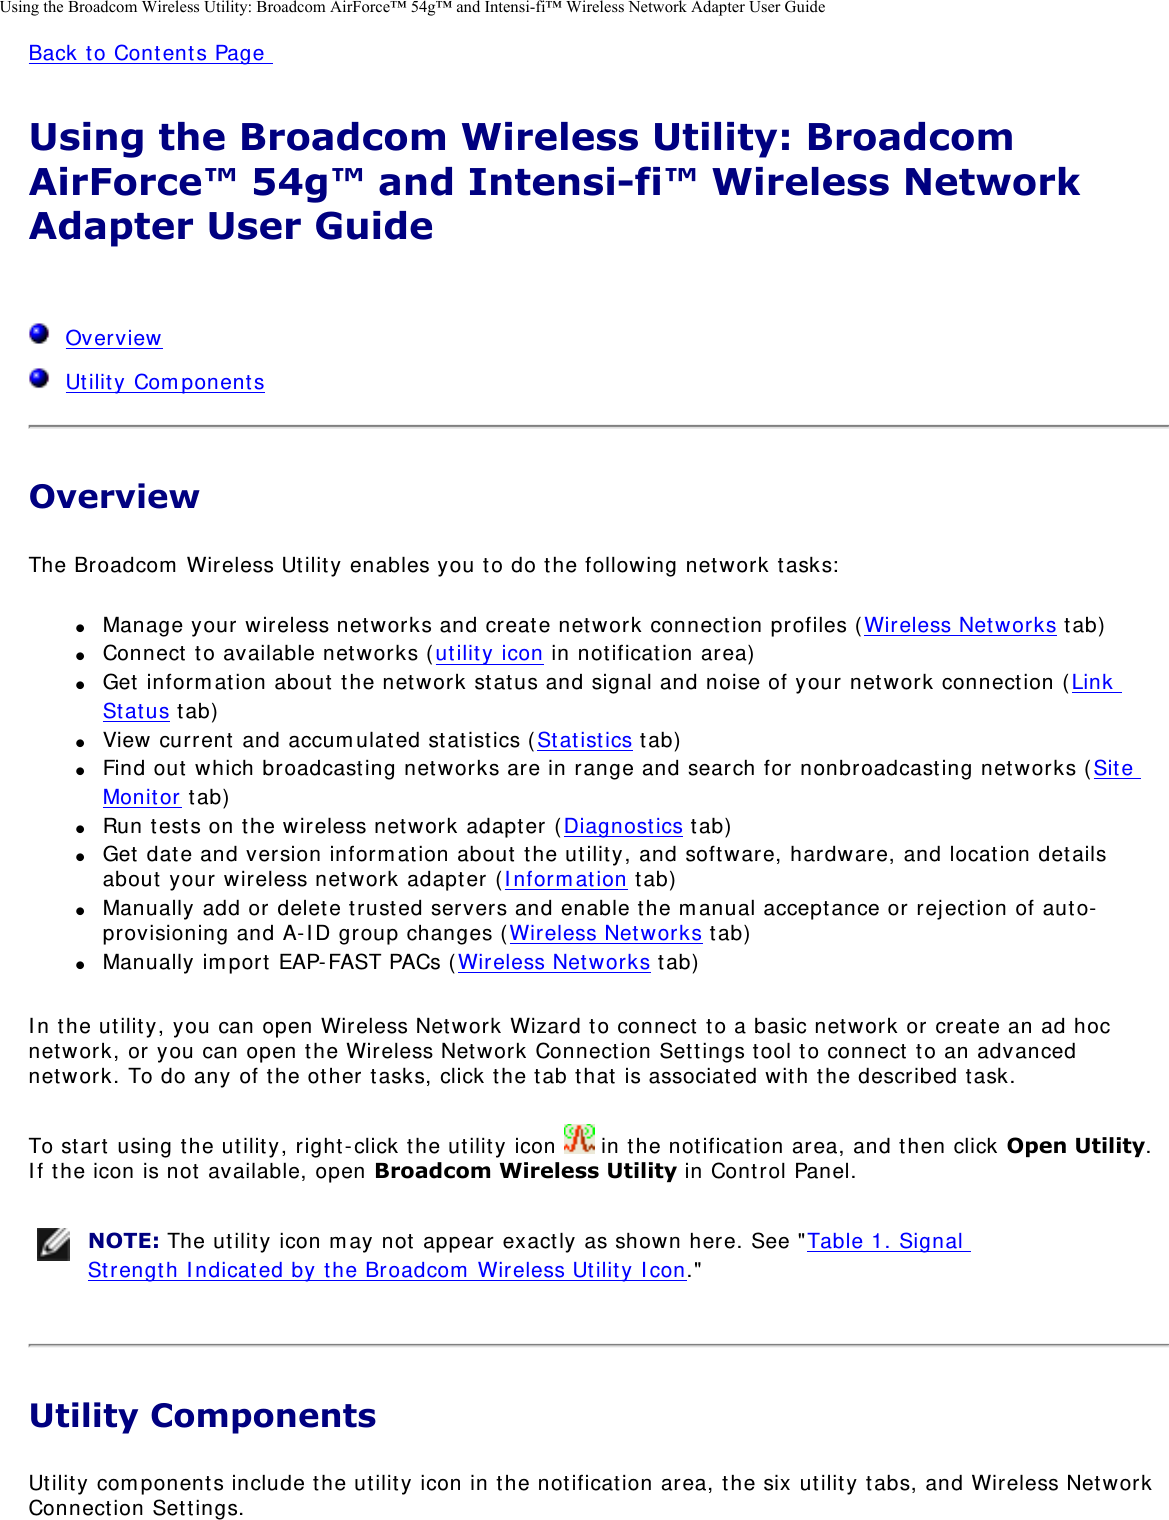 Using the Broadcom Wireless Utility: Broadcom AirForce™ 54g™ and Intensi-fi™ Wireless Network Adapter User GuideBack to Contents Page Using the Broadcom Wireless Utility: Broadcom AirForce™ 54g™ and Intensi-fi™ Wireless Network Adapter User Guide   Overview  Utility ComponentsOverviewThe Broadcom Wireless Utility enables you to do the following network tasks: ●     Manage your wireless networks and create network connection profiles (Wireless Networks tab) ●     Connect to available networks (utility icon in notification area) ●     Get information about the network status and signal and noise of your network connection (Link Status tab) ●     View current and accumulated statistics (Statistics tab) ●     Find out which broadcasting networks are in range and search for nonbroadcasting networks (Site Monitor tab) ●     Run tests on the wireless network adapter (Diagnostics tab) ●     Get date and version information about the utility, and software, hardware, and location details about your wireless network adapter (Information tab) ●     Manually add or delete trusted servers and enable the manual acceptance or rejection of auto-provisioning and A-ID group changes (Wireless Networks tab) ●     Manually import EAP-FAST PACs (Wireless Networks tab) In the utility, you can open Wireless Network Wizard to connect to a basic network or create an ad hoc network, or you can open the Wireless Network Connection Settings tool to connect to an advanced network. To do any of the other tasks, click the tab that is associated with the described task. To start using the utility, right-click the utility icon   in the notification area, and then click Open Utility. If the icon is not available, open Broadcom Wireless Utility in Control Panel.  NOTE: The utility icon may not appear exactly as shown here. See &quot;Table 1. Signal Strength Indicated by the Broadcom Wireless Utility Icon.&quot; Utility ComponentsUtility components include the utility icon in the notification area, the six utility tabs, and Wireless Network Connection Settings. 